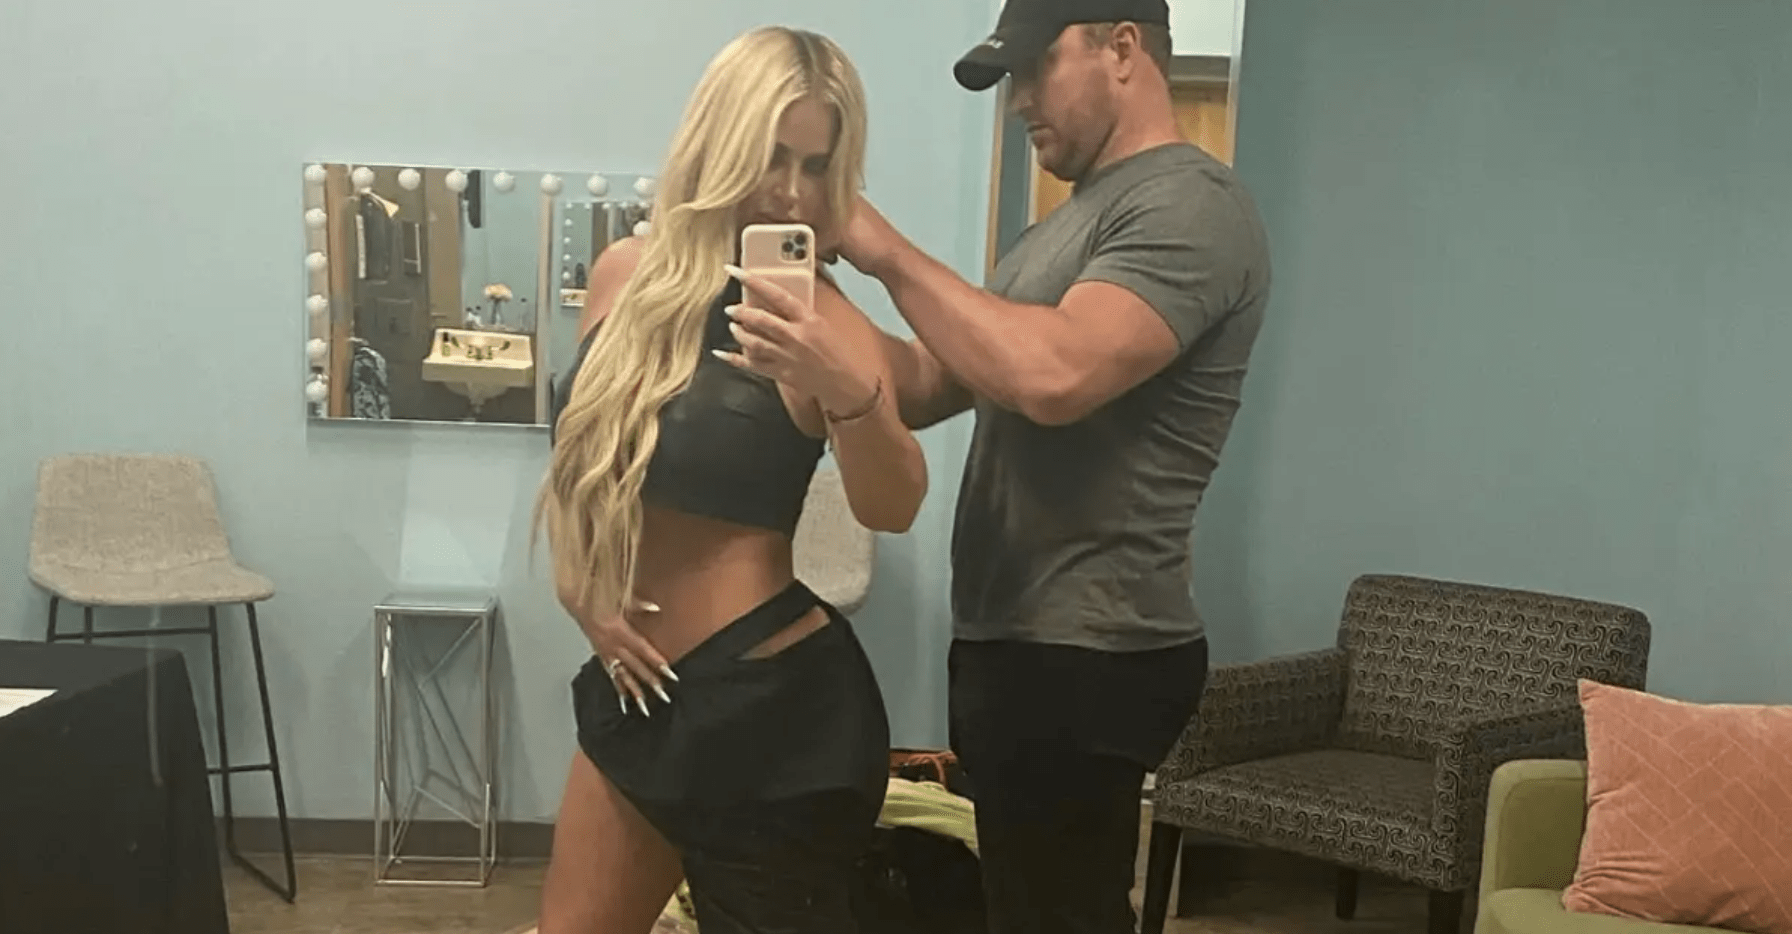 Kroy Biermann Remains Committed to Divorcing Kim Zolciak Despite Sexual Relations